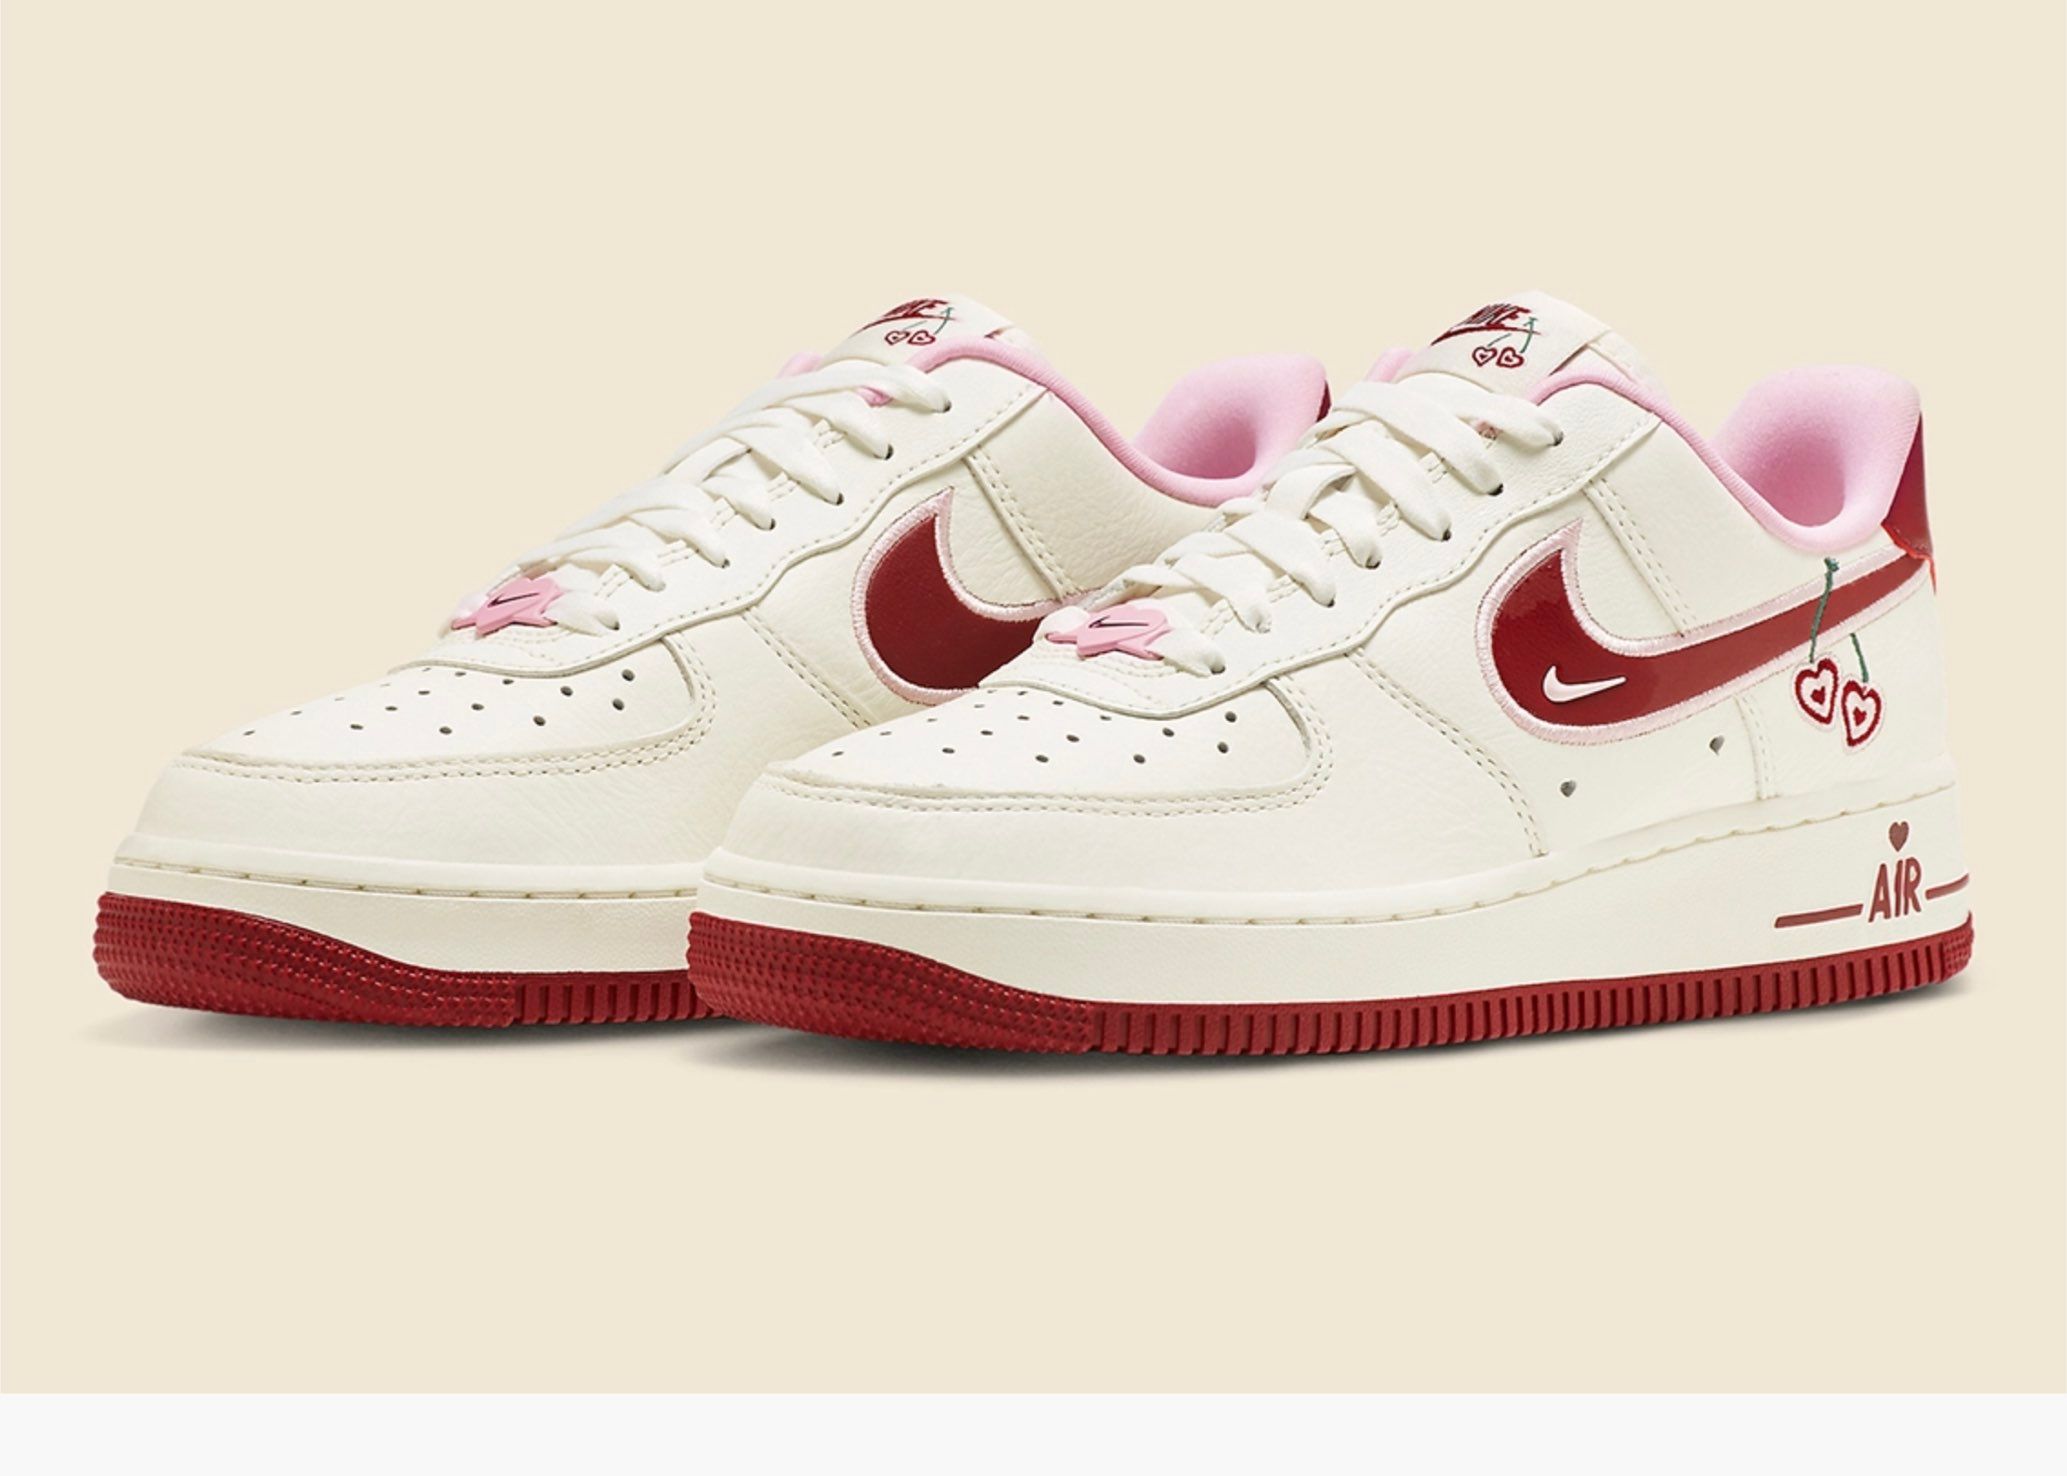 Air force valentines day. Nike Air Force 1 Low “Valentine’s Day” 2023. Nike Air Force 1 Low Valentine s Day 2023. Nike Air Force 1 Valentine's Day 2023. Nike Air Force Valentines Day 2023.